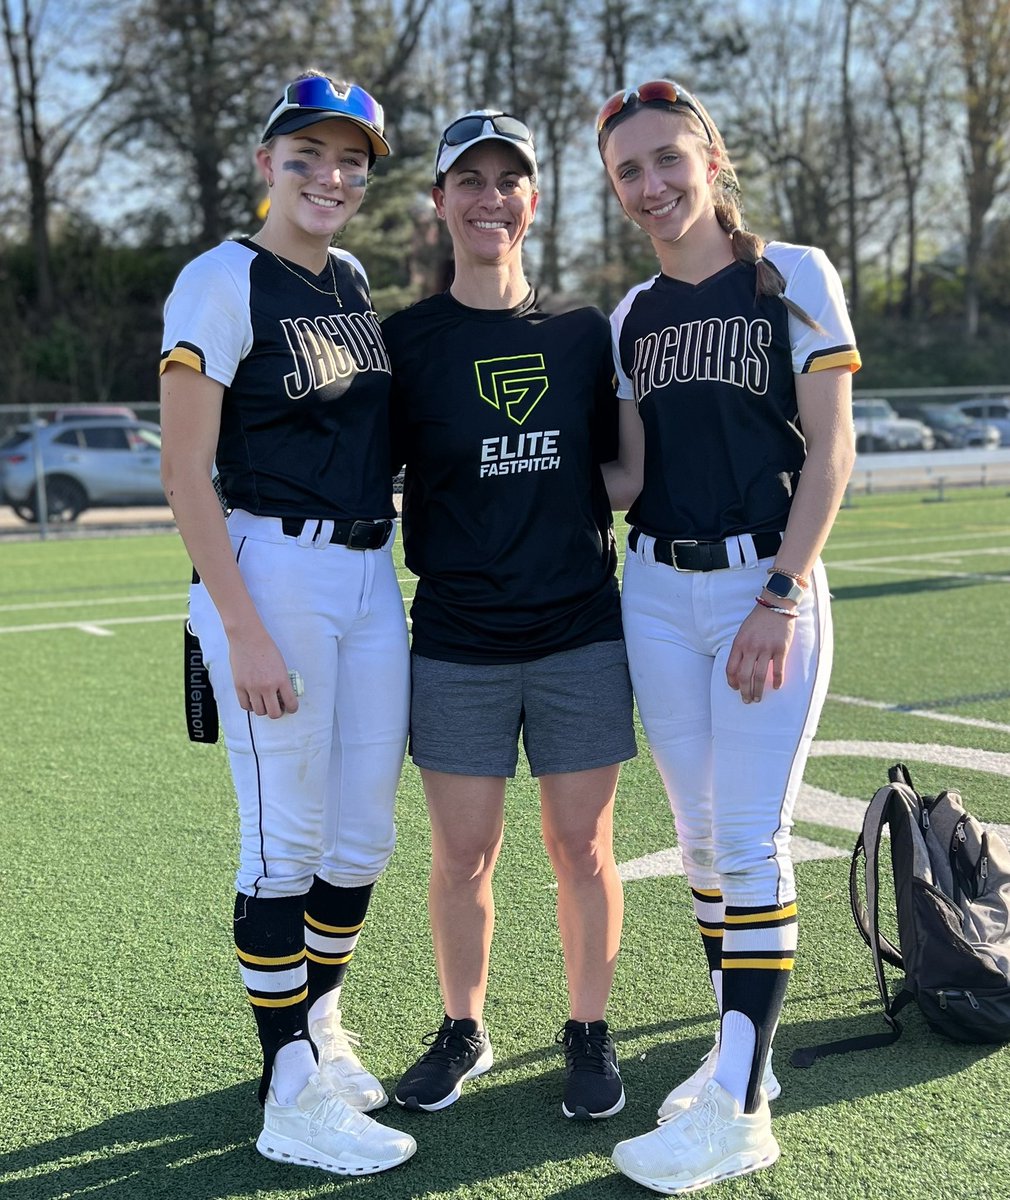 Loved watching my girls @zoe_krizan16 and @hannah_alonso1 today!! They really showed out! Lots of QABs- a home run and a beautiful bunt!! Proud of you ladies! #proudcoach @teampafastpitch